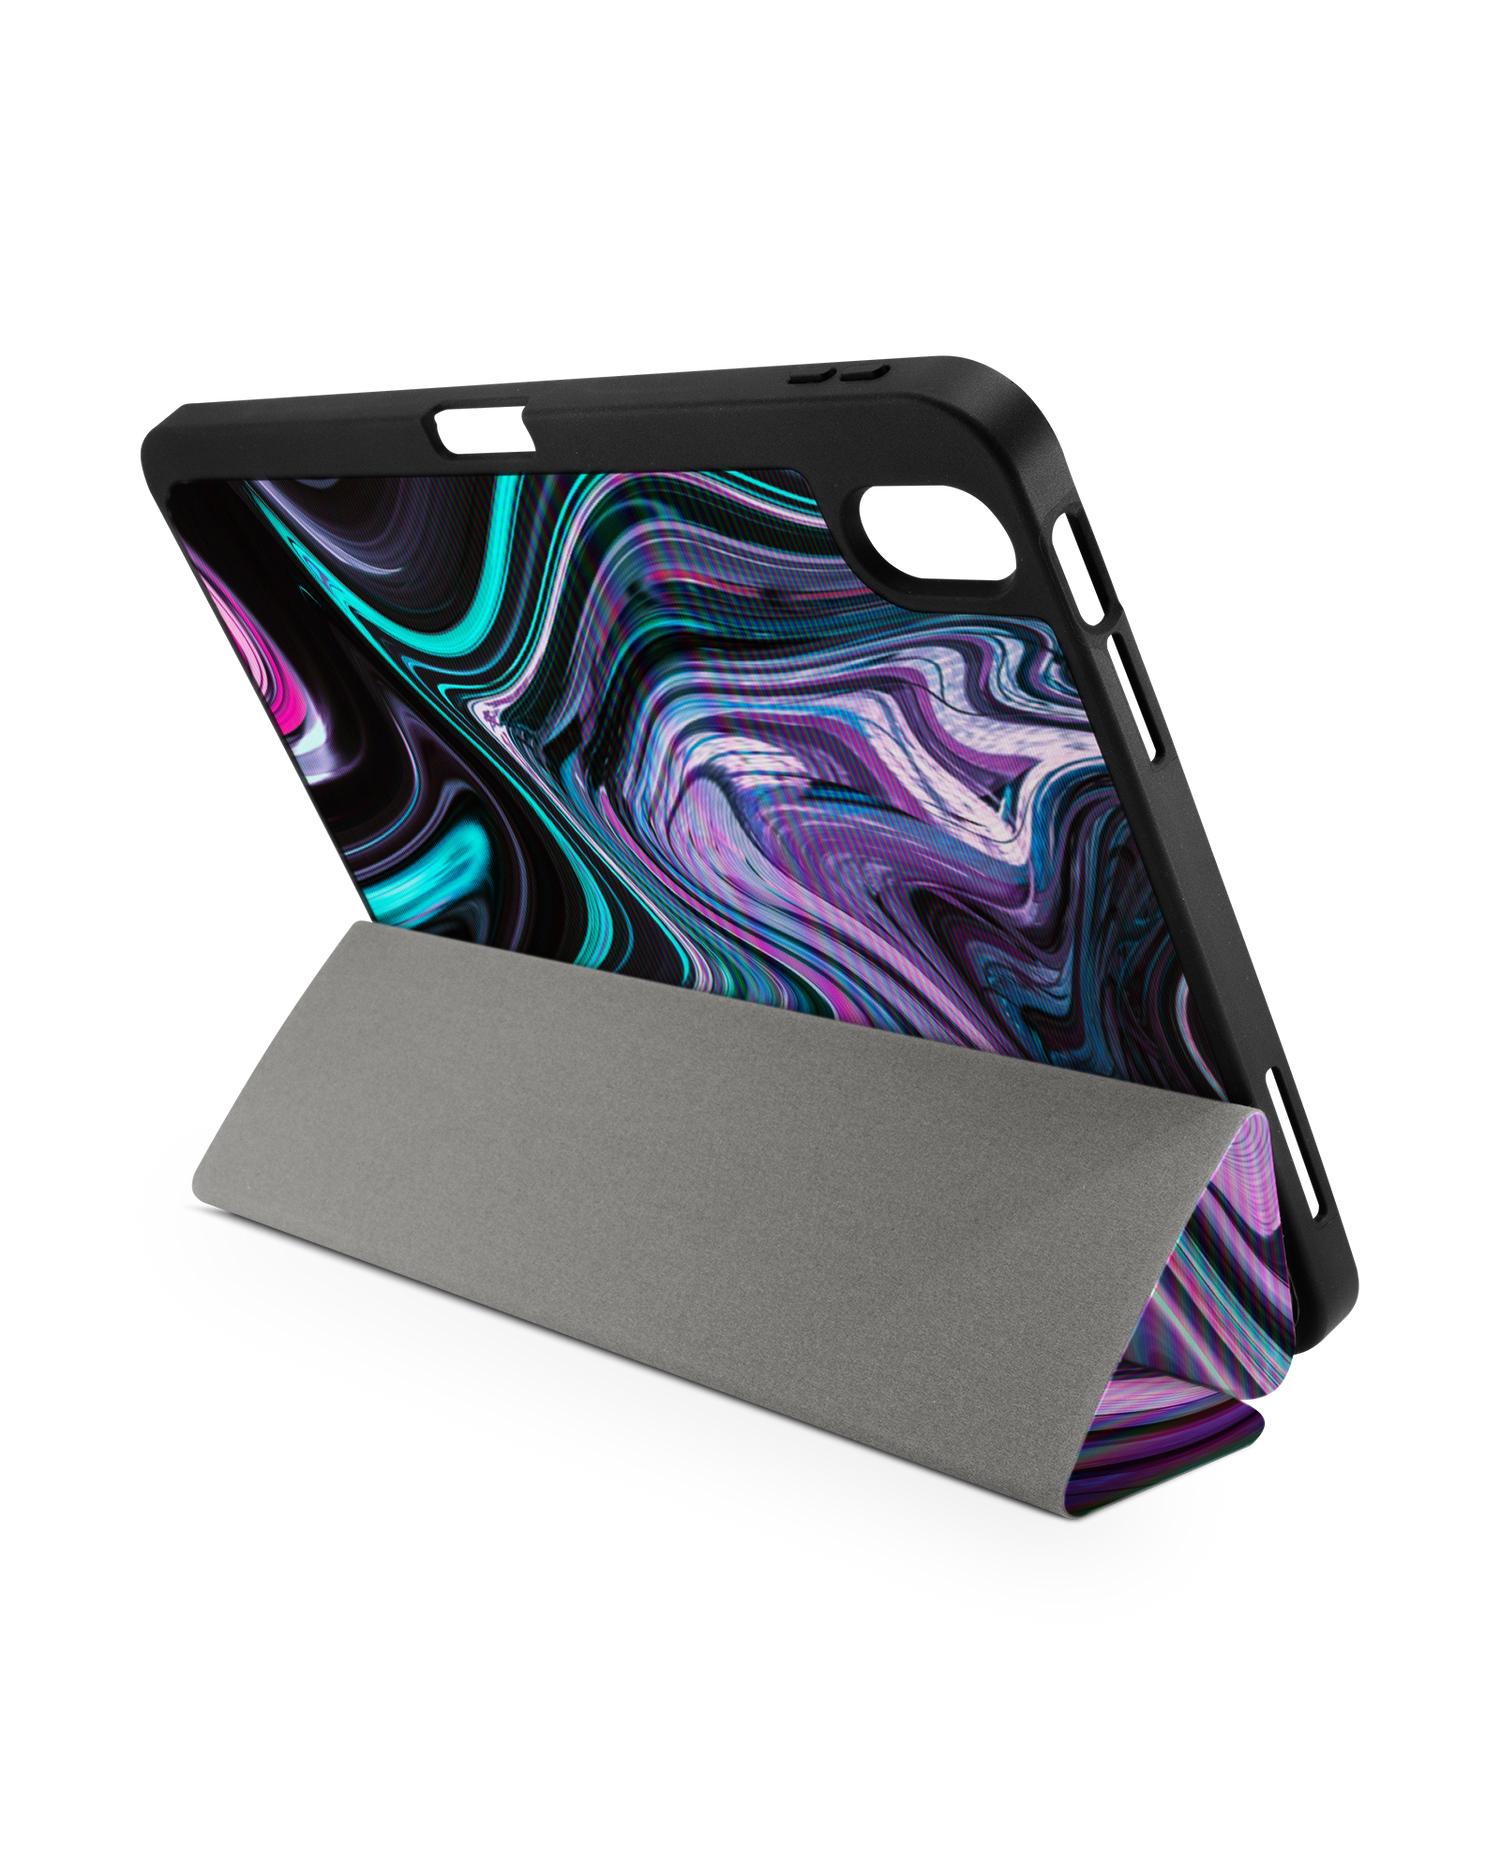 Digital Swirl iPad Case with Pencil Holder for Apple iPad (10th Generation): Set up in landscape format (back view)